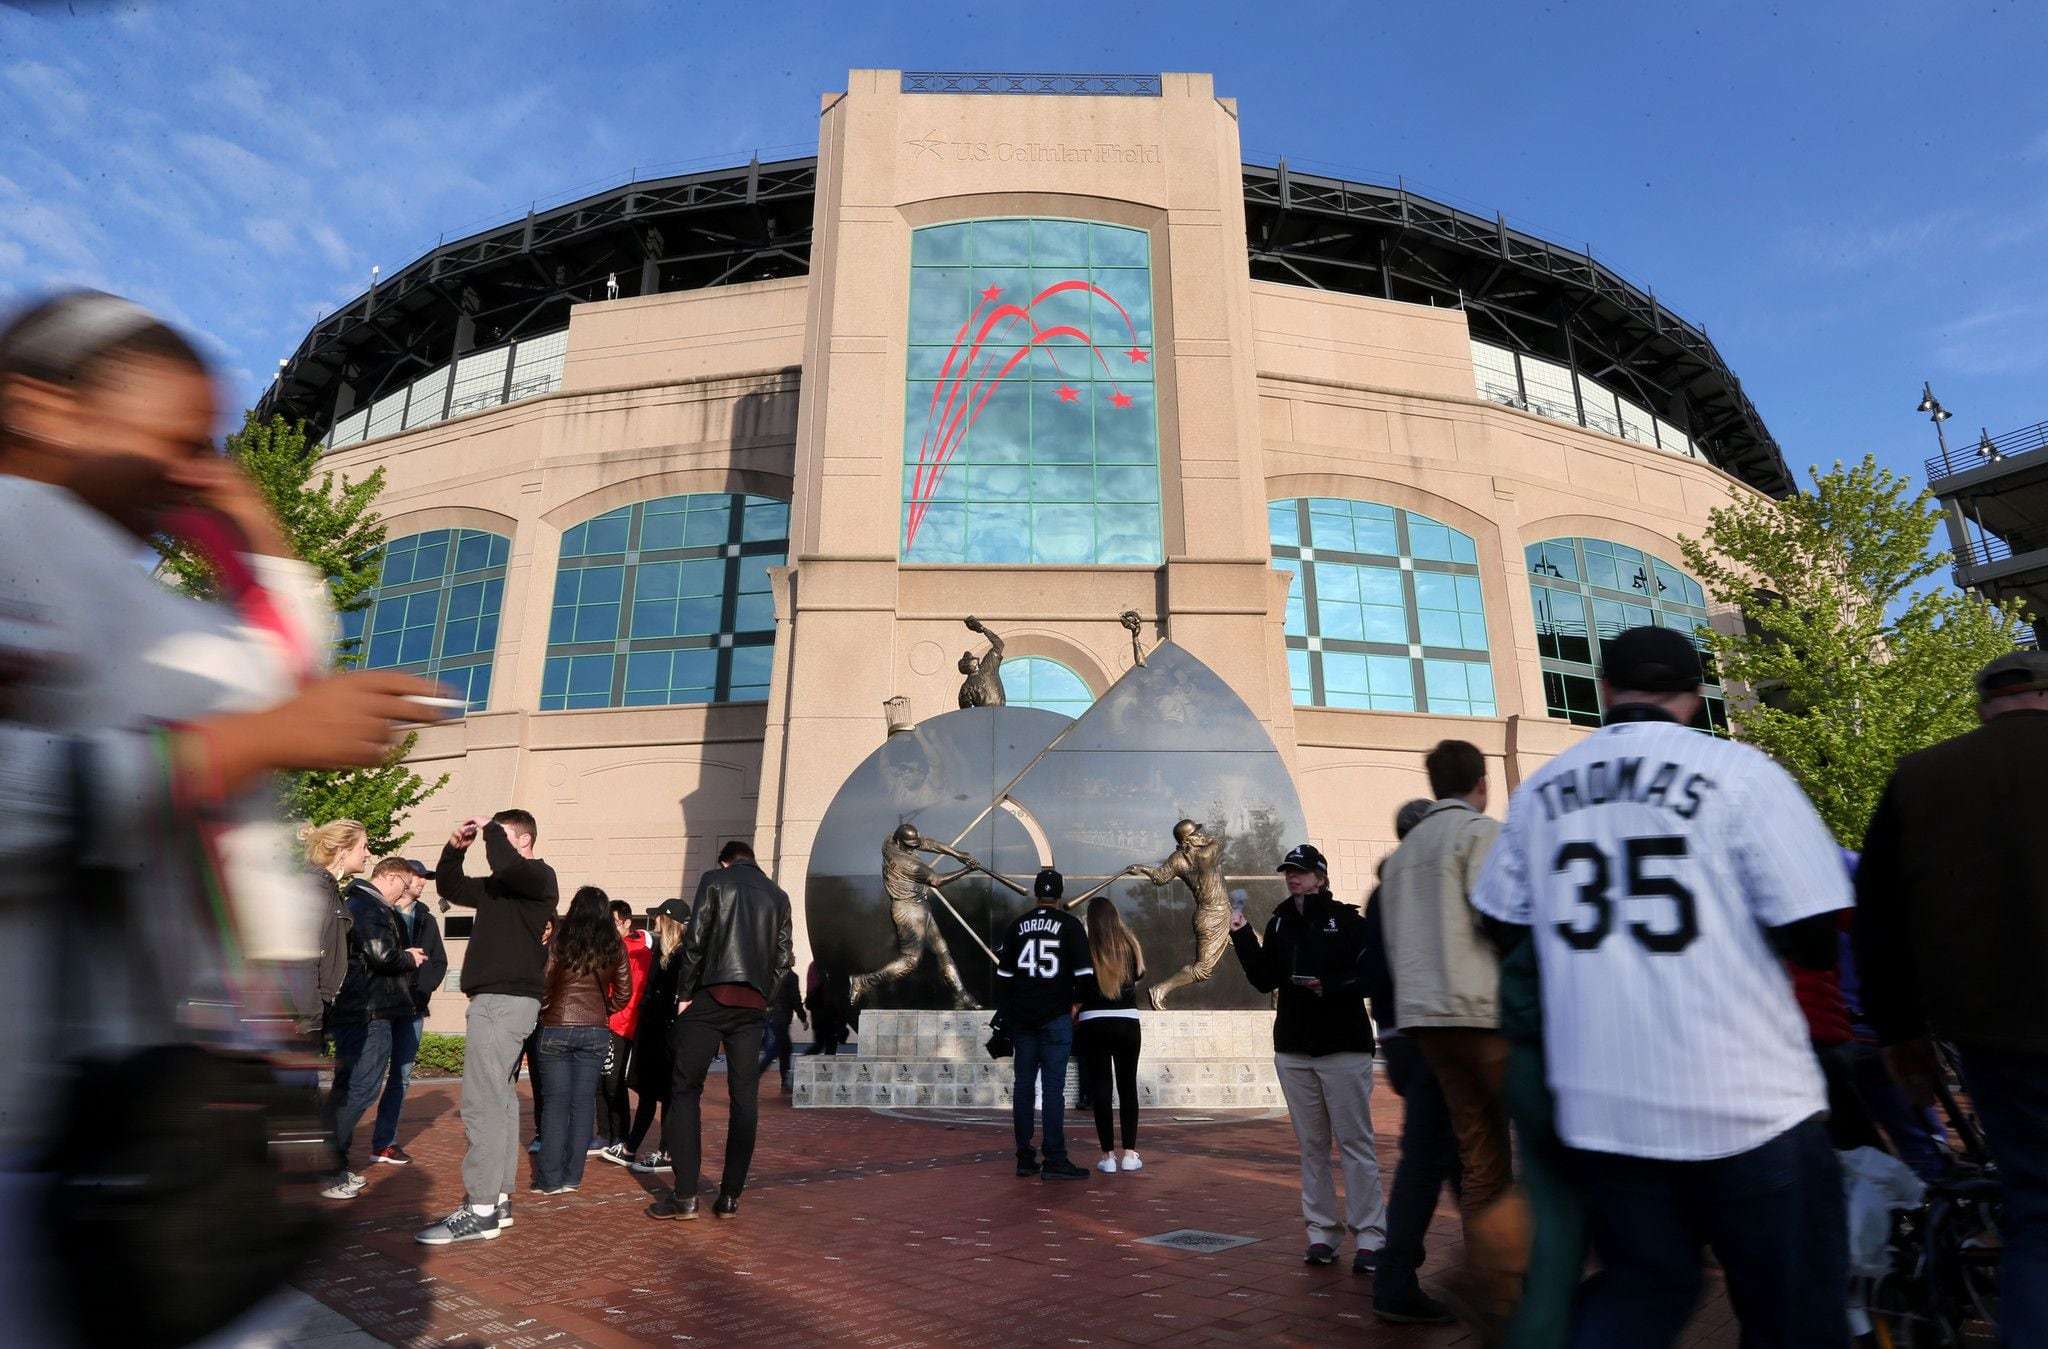 south loop alderman throws support behind new white sox stadium after developer meeting